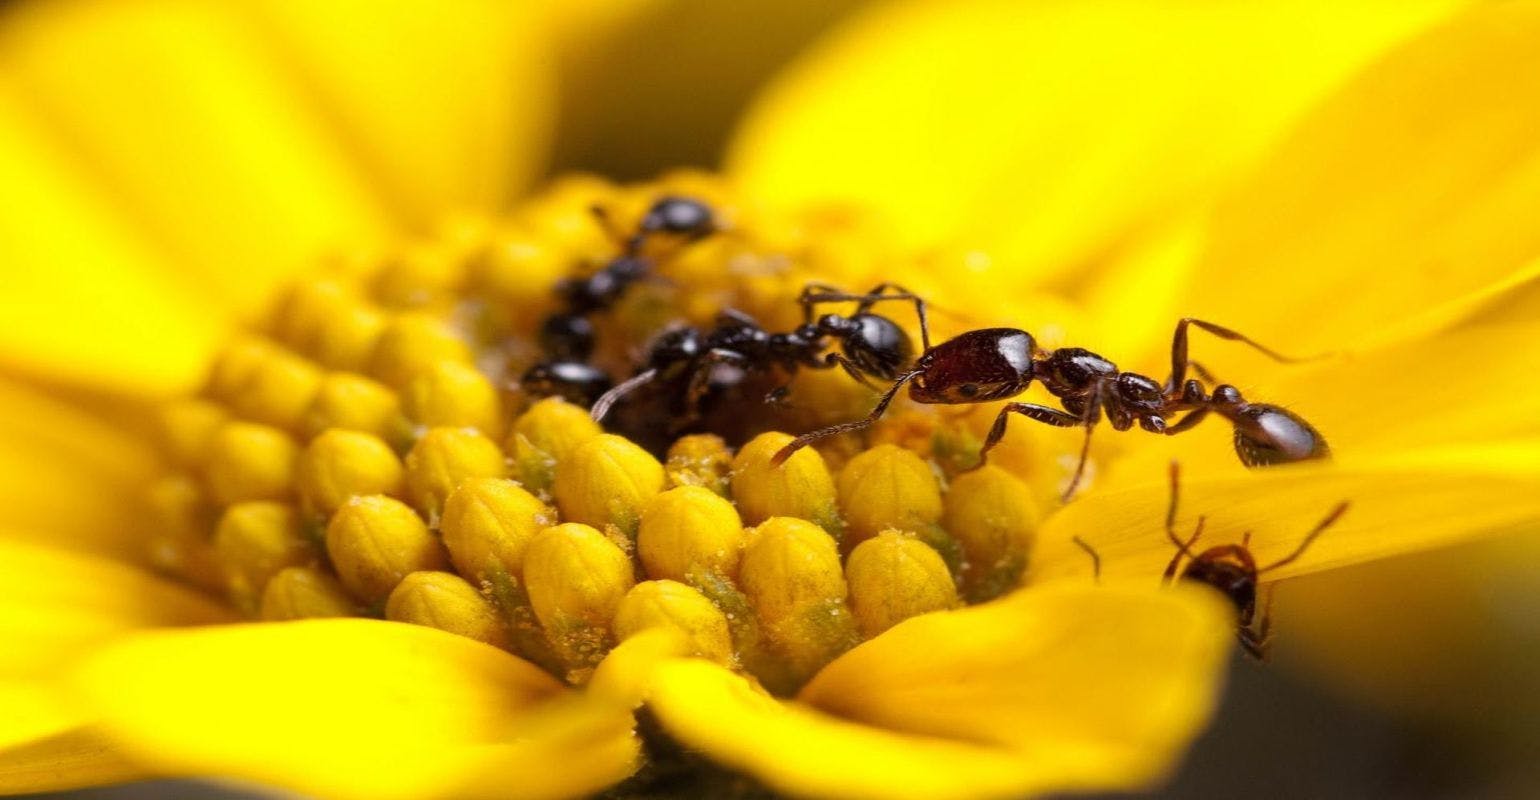 Study Sheds New Light on Antibiotics Produced by Ants